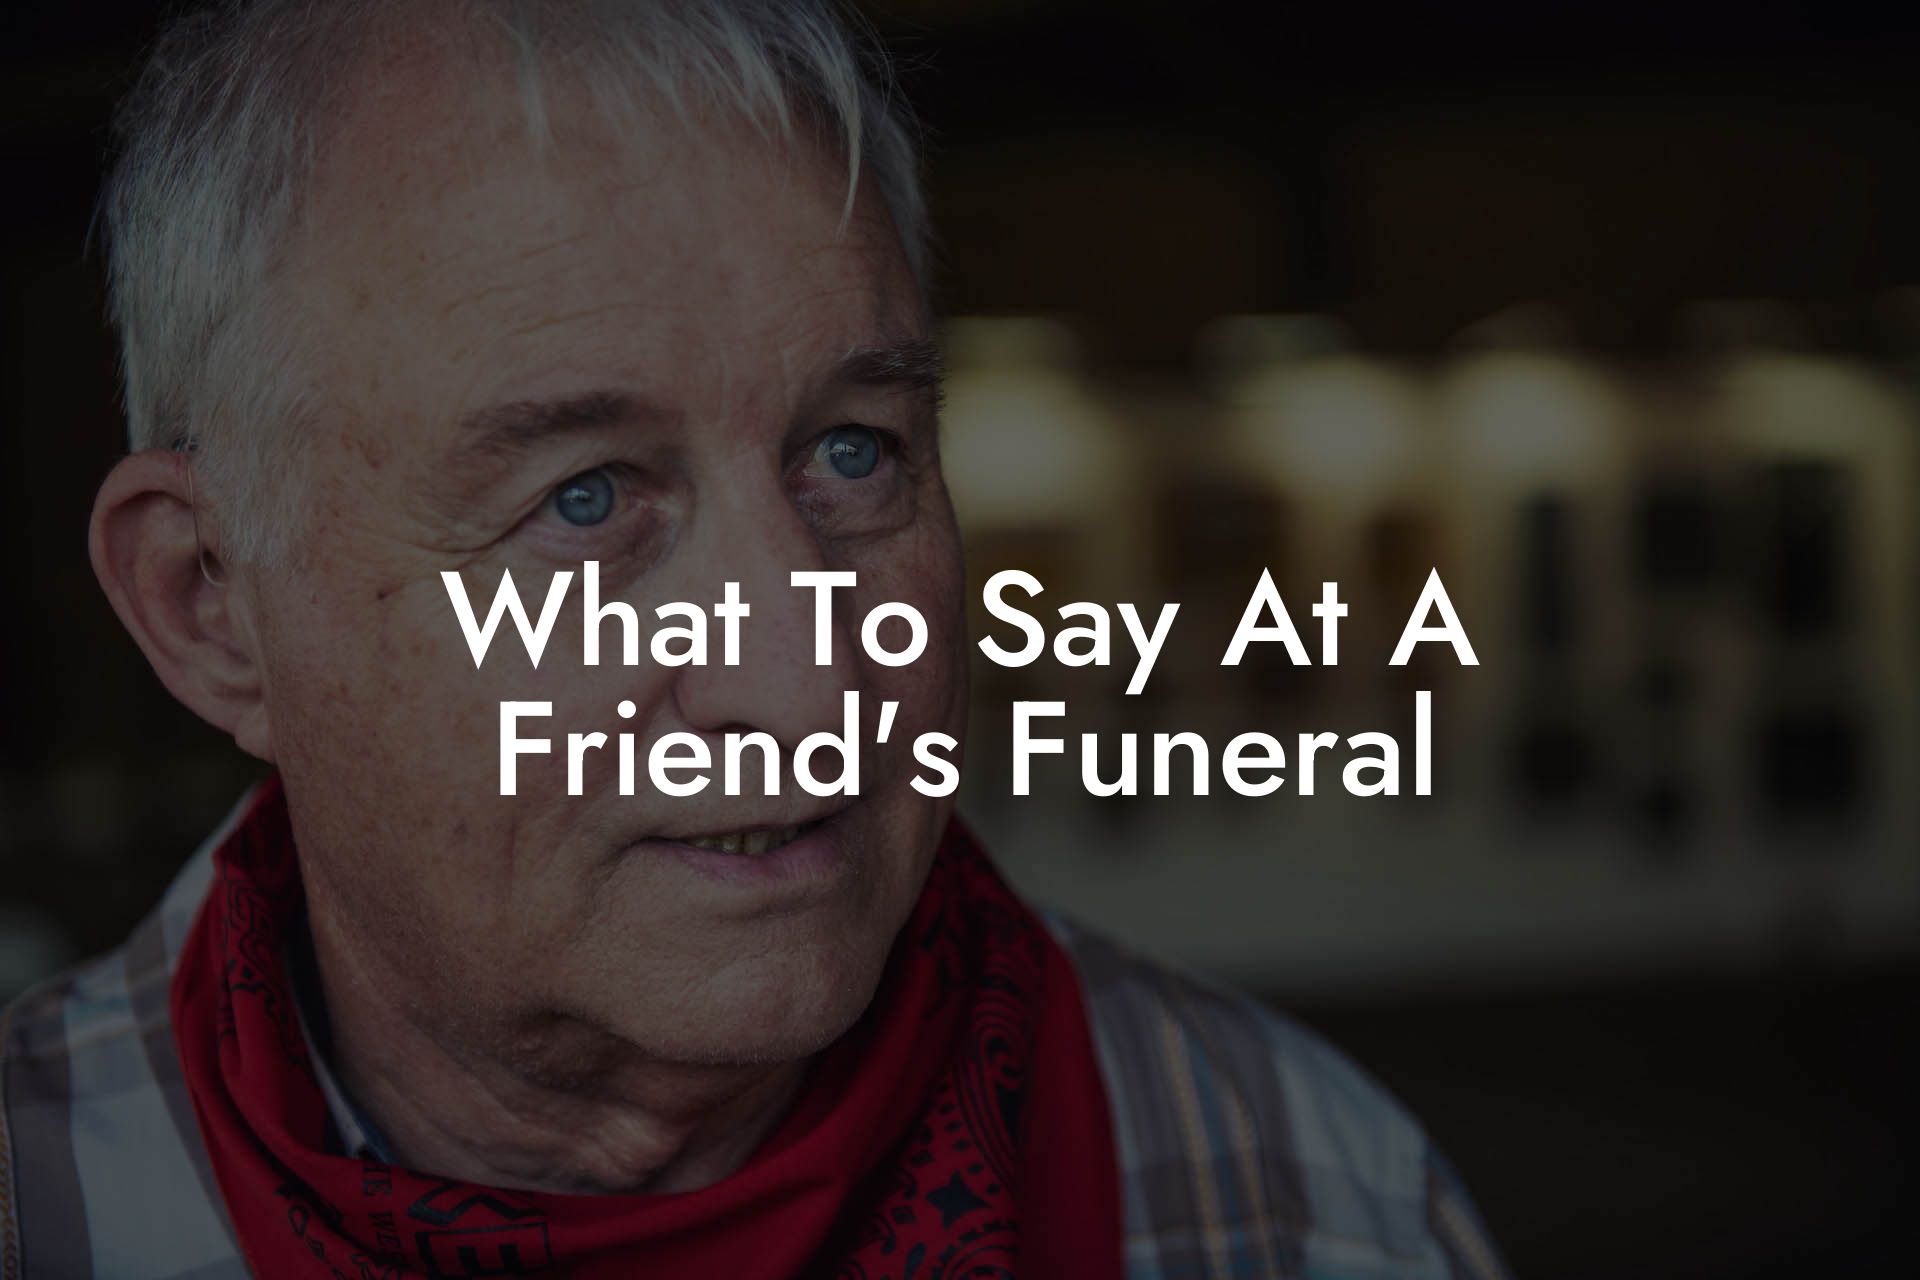 What To Say At A Friend's Funeral